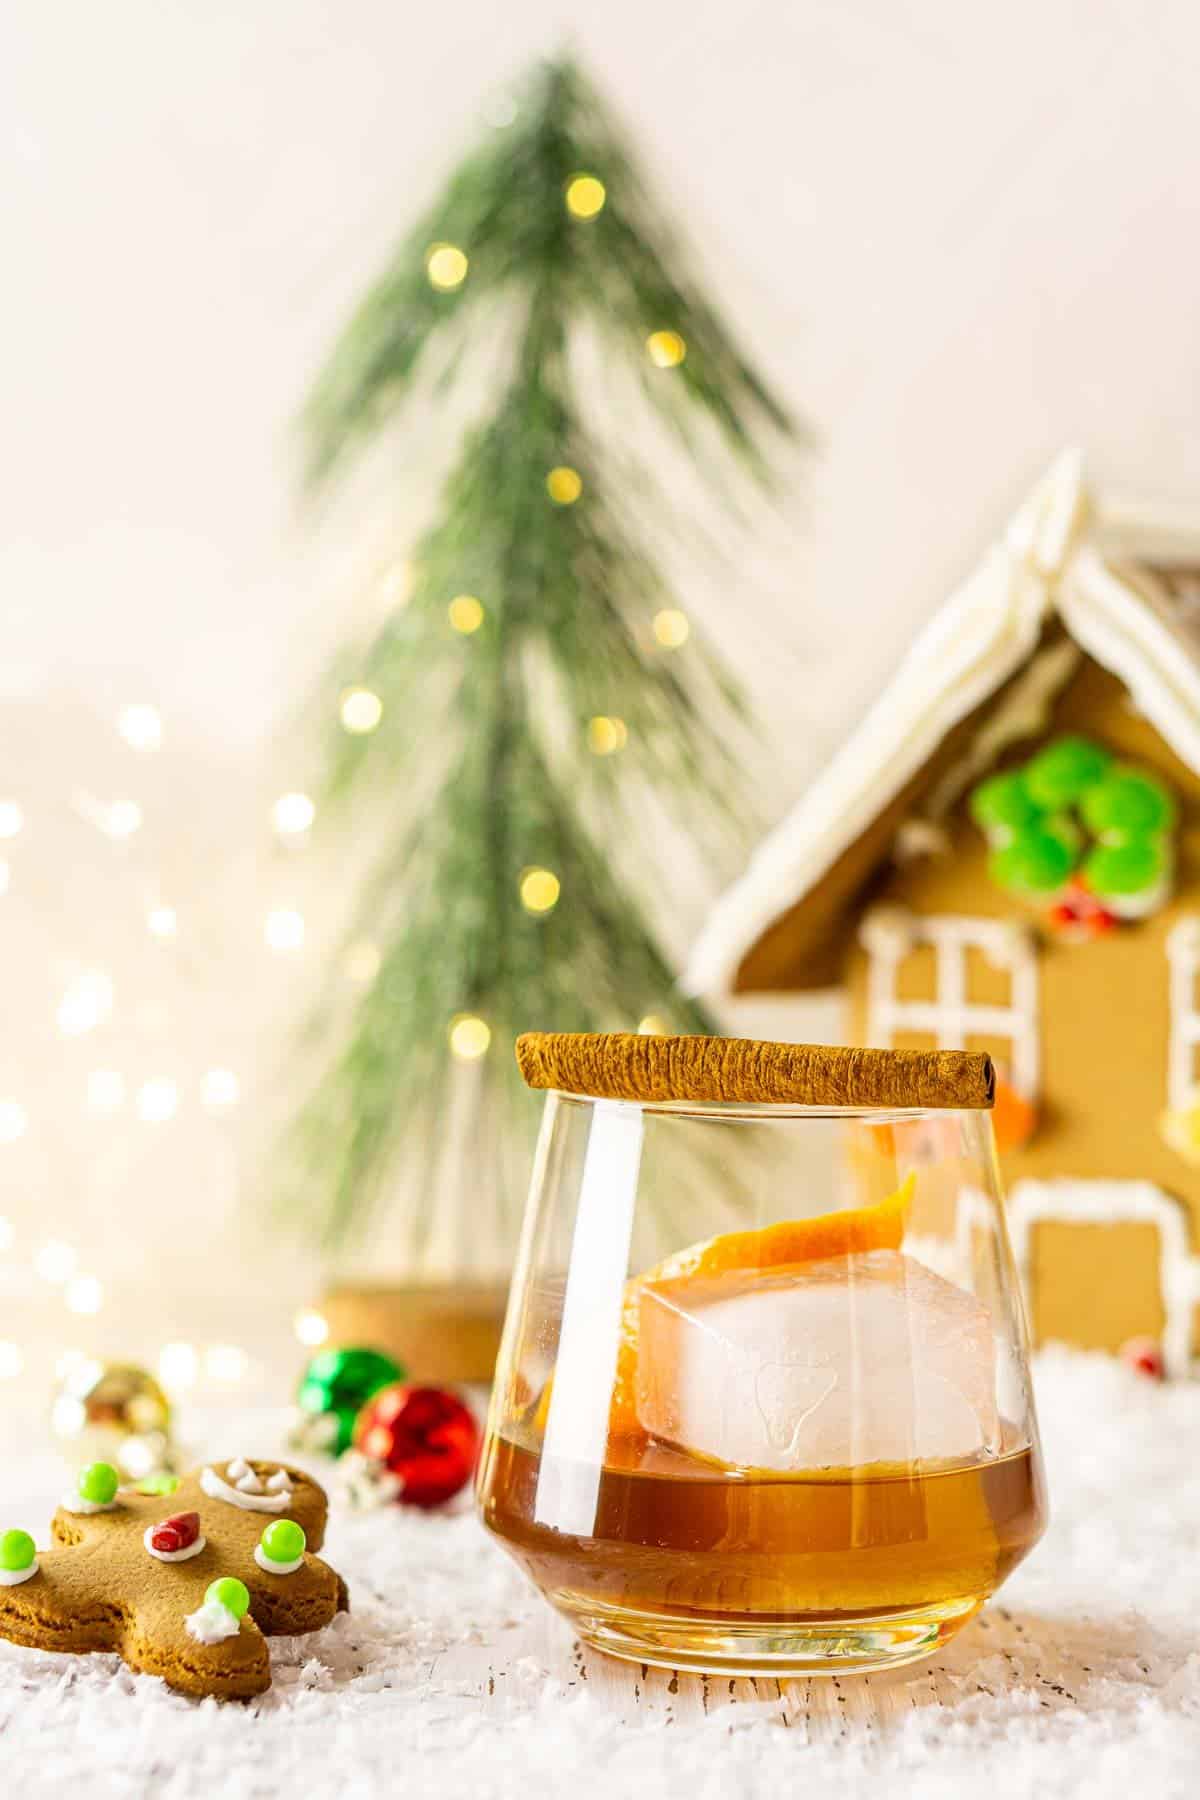 A close-up of the gingerbread fashioned with sparkling lights behind it.